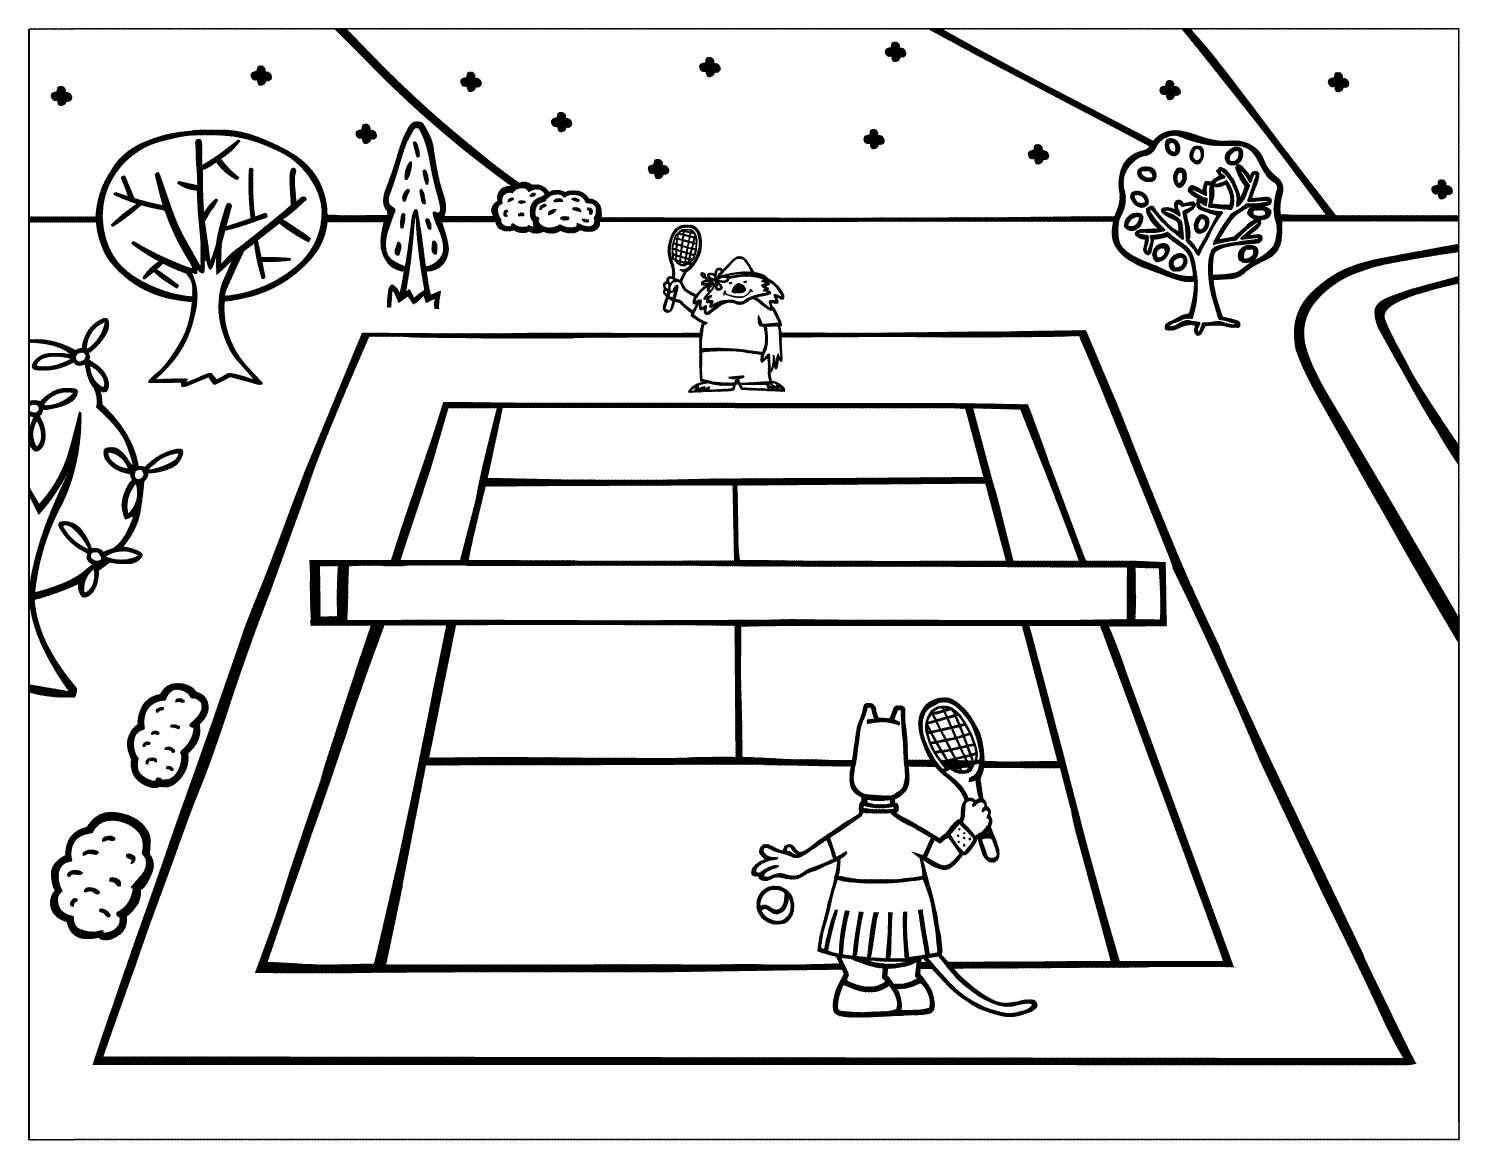 Coloring page area 